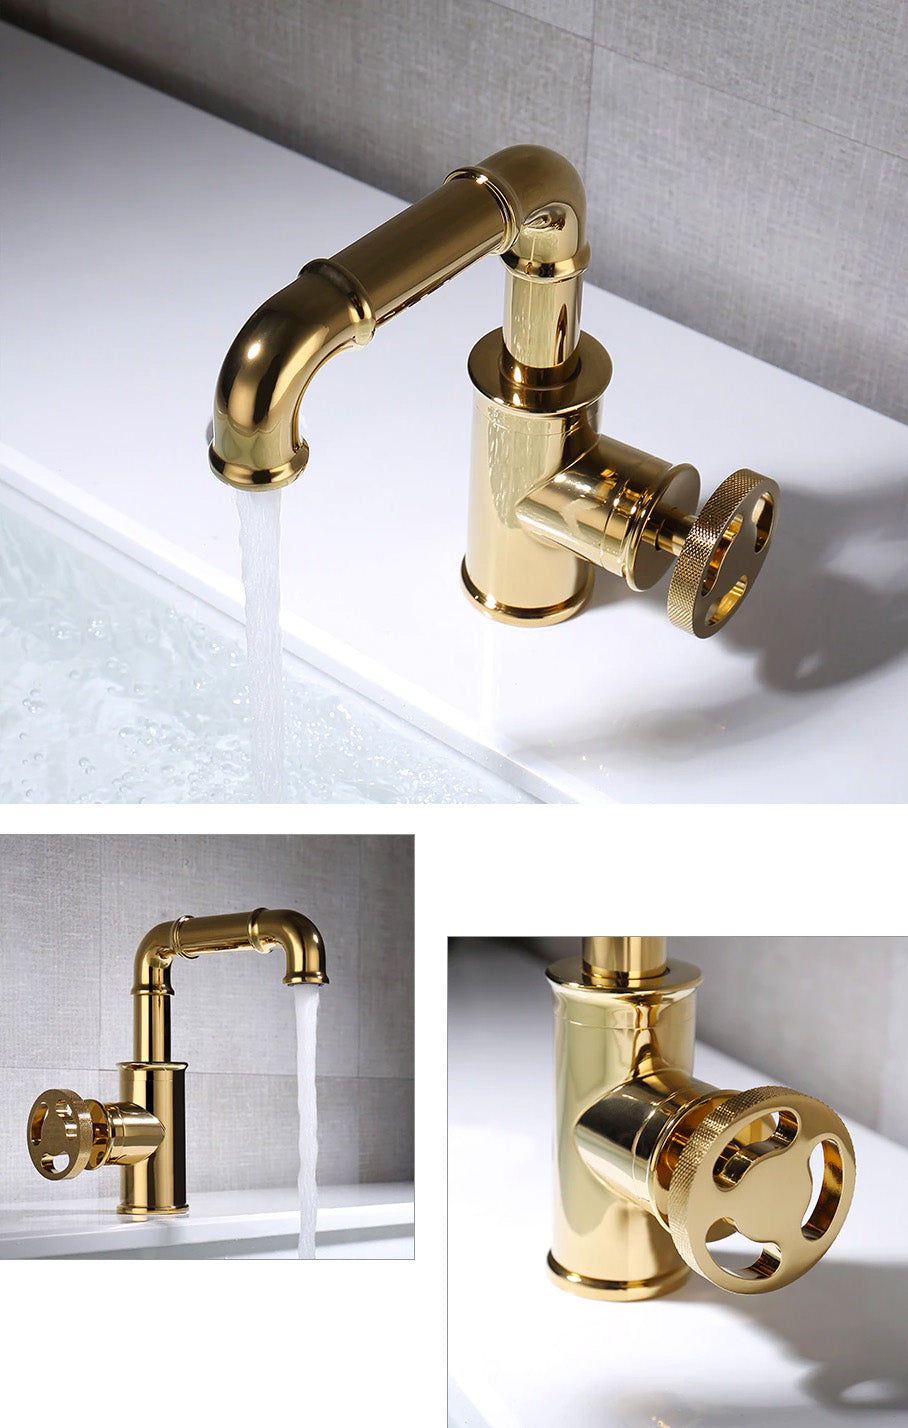 Industrial Bathroom Sink Faucet with polished brass finish. Single Handle, single hole mount